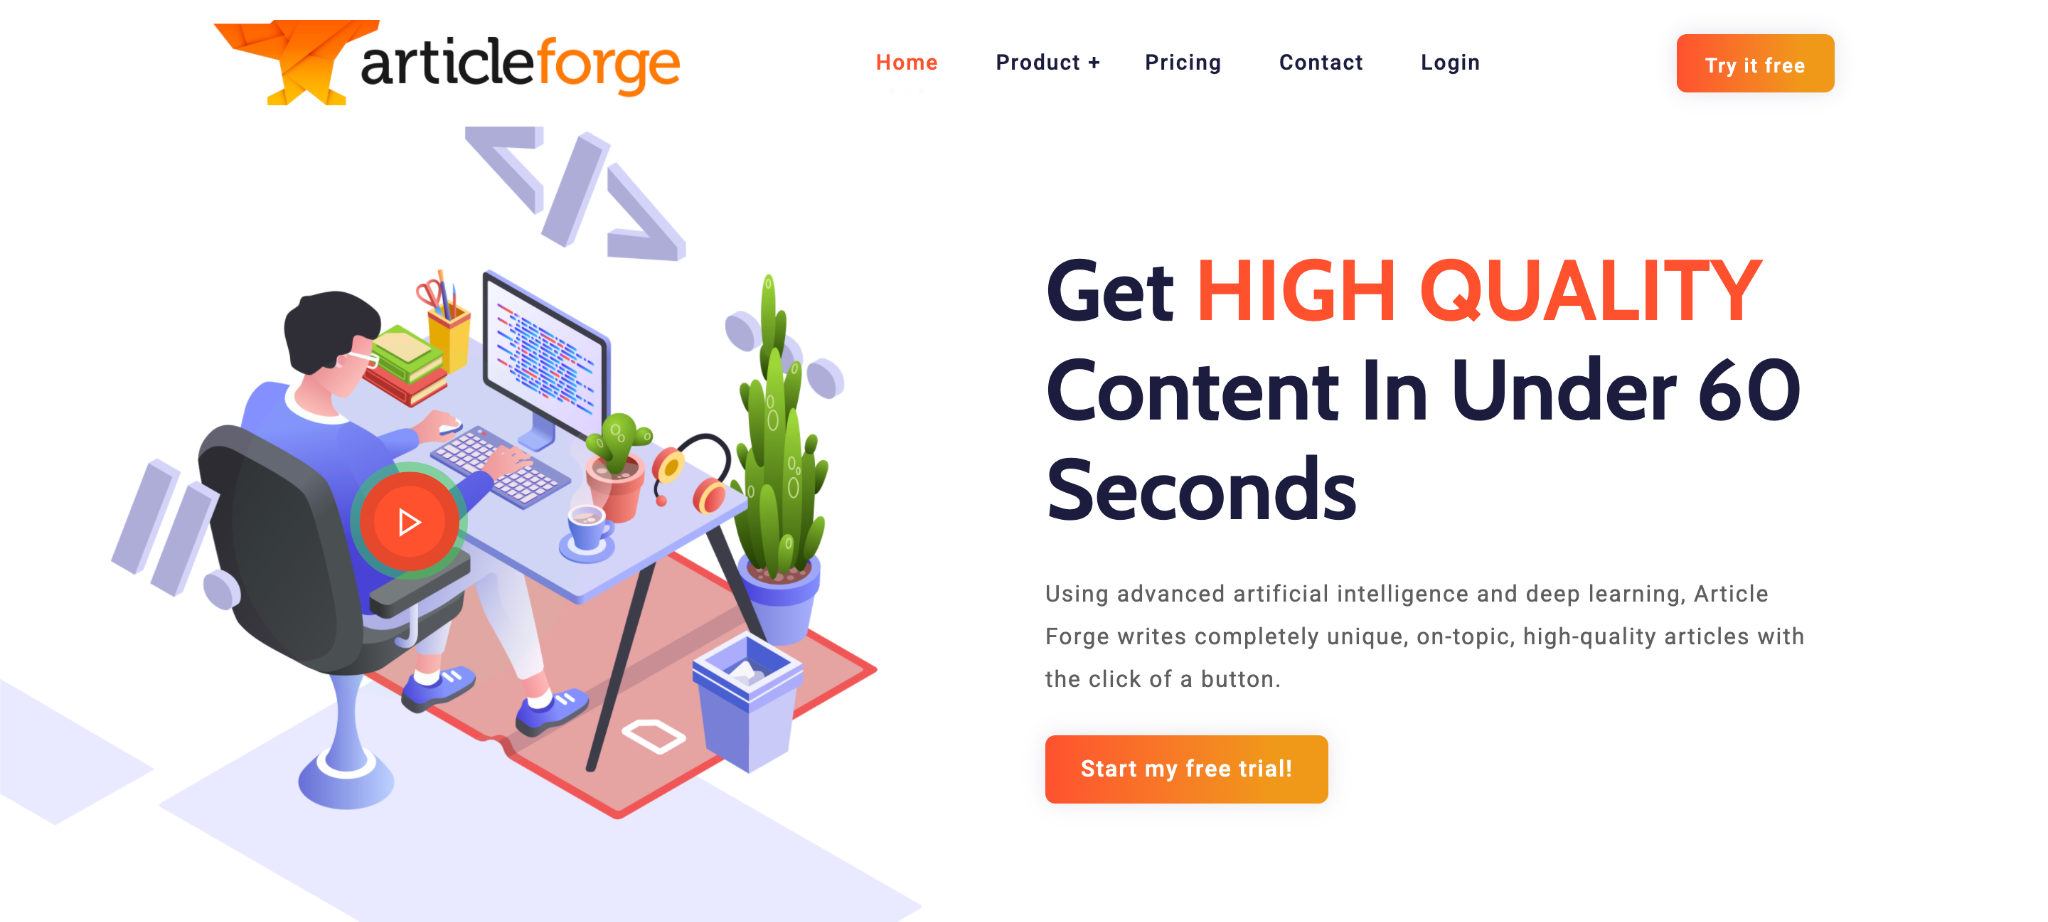 Article forge